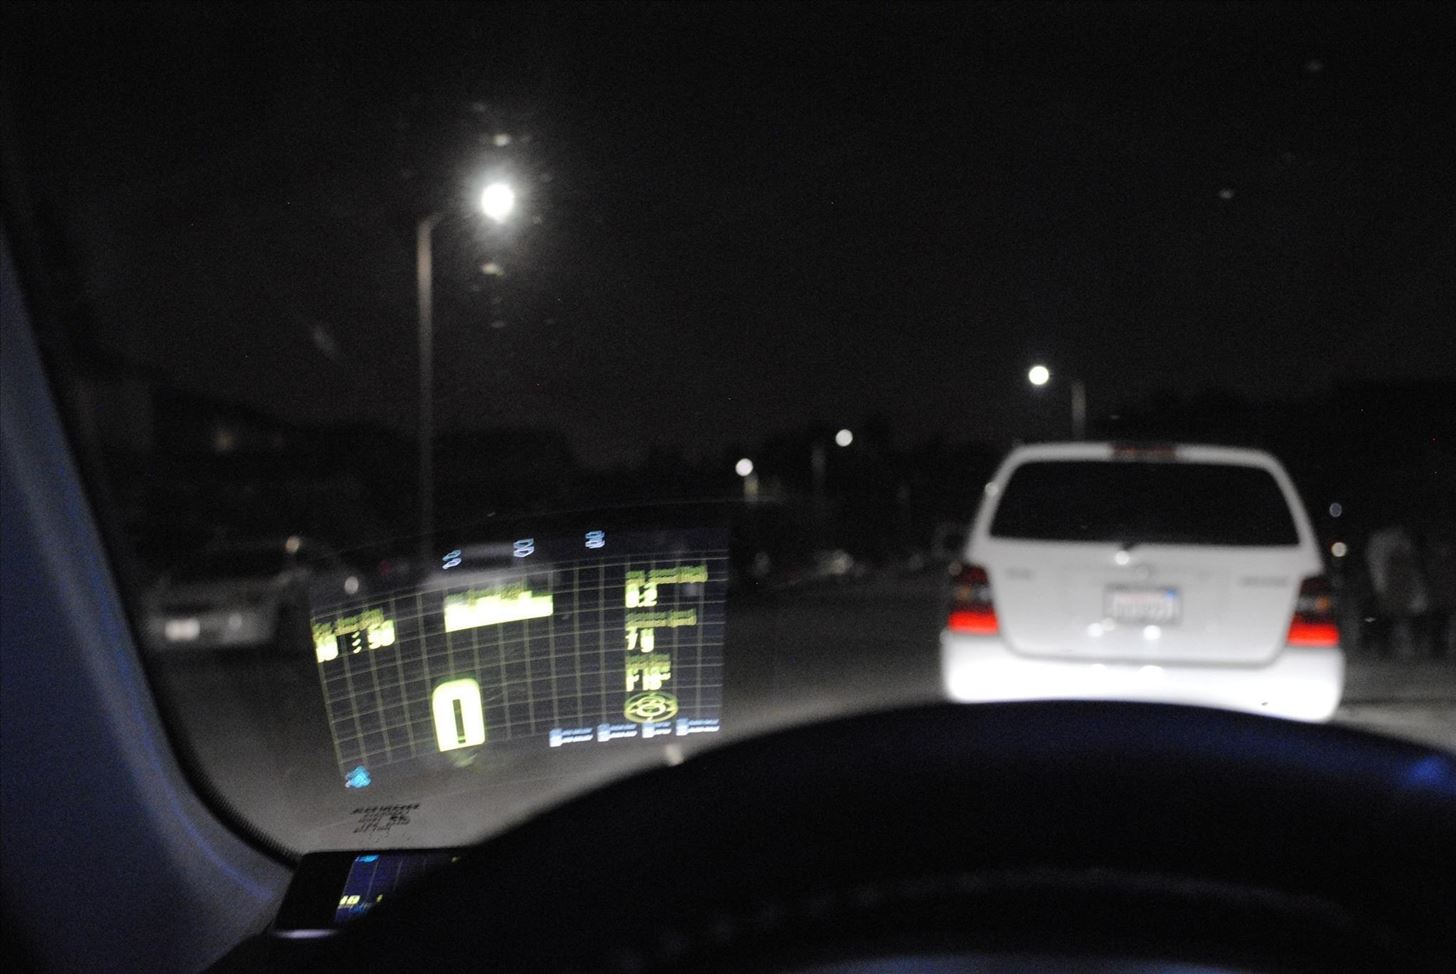 How to Turn Your Nexus 7 Tablet into a Futuristic Heads-Up Display (HUD) for Your Car